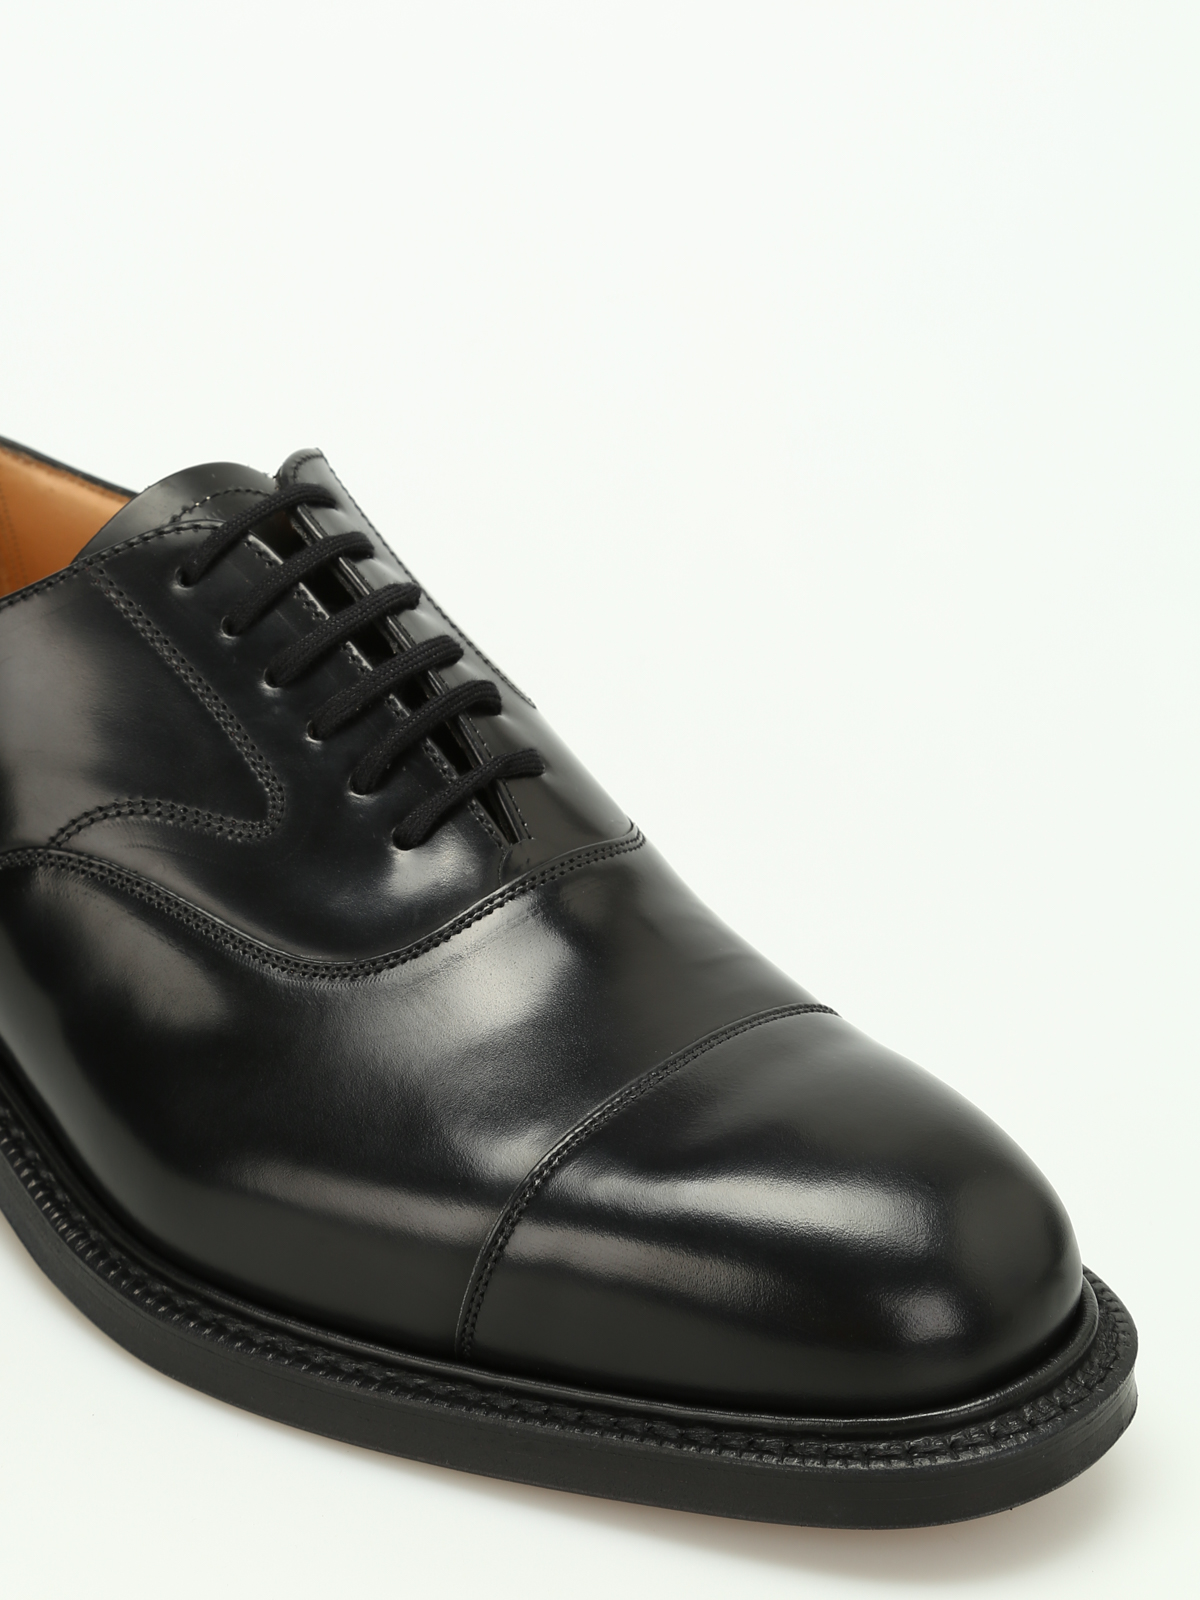 Classic shoes Church's - Lancaster polished binder shoes -  LANCASTER173EEB0109XVF0AAB